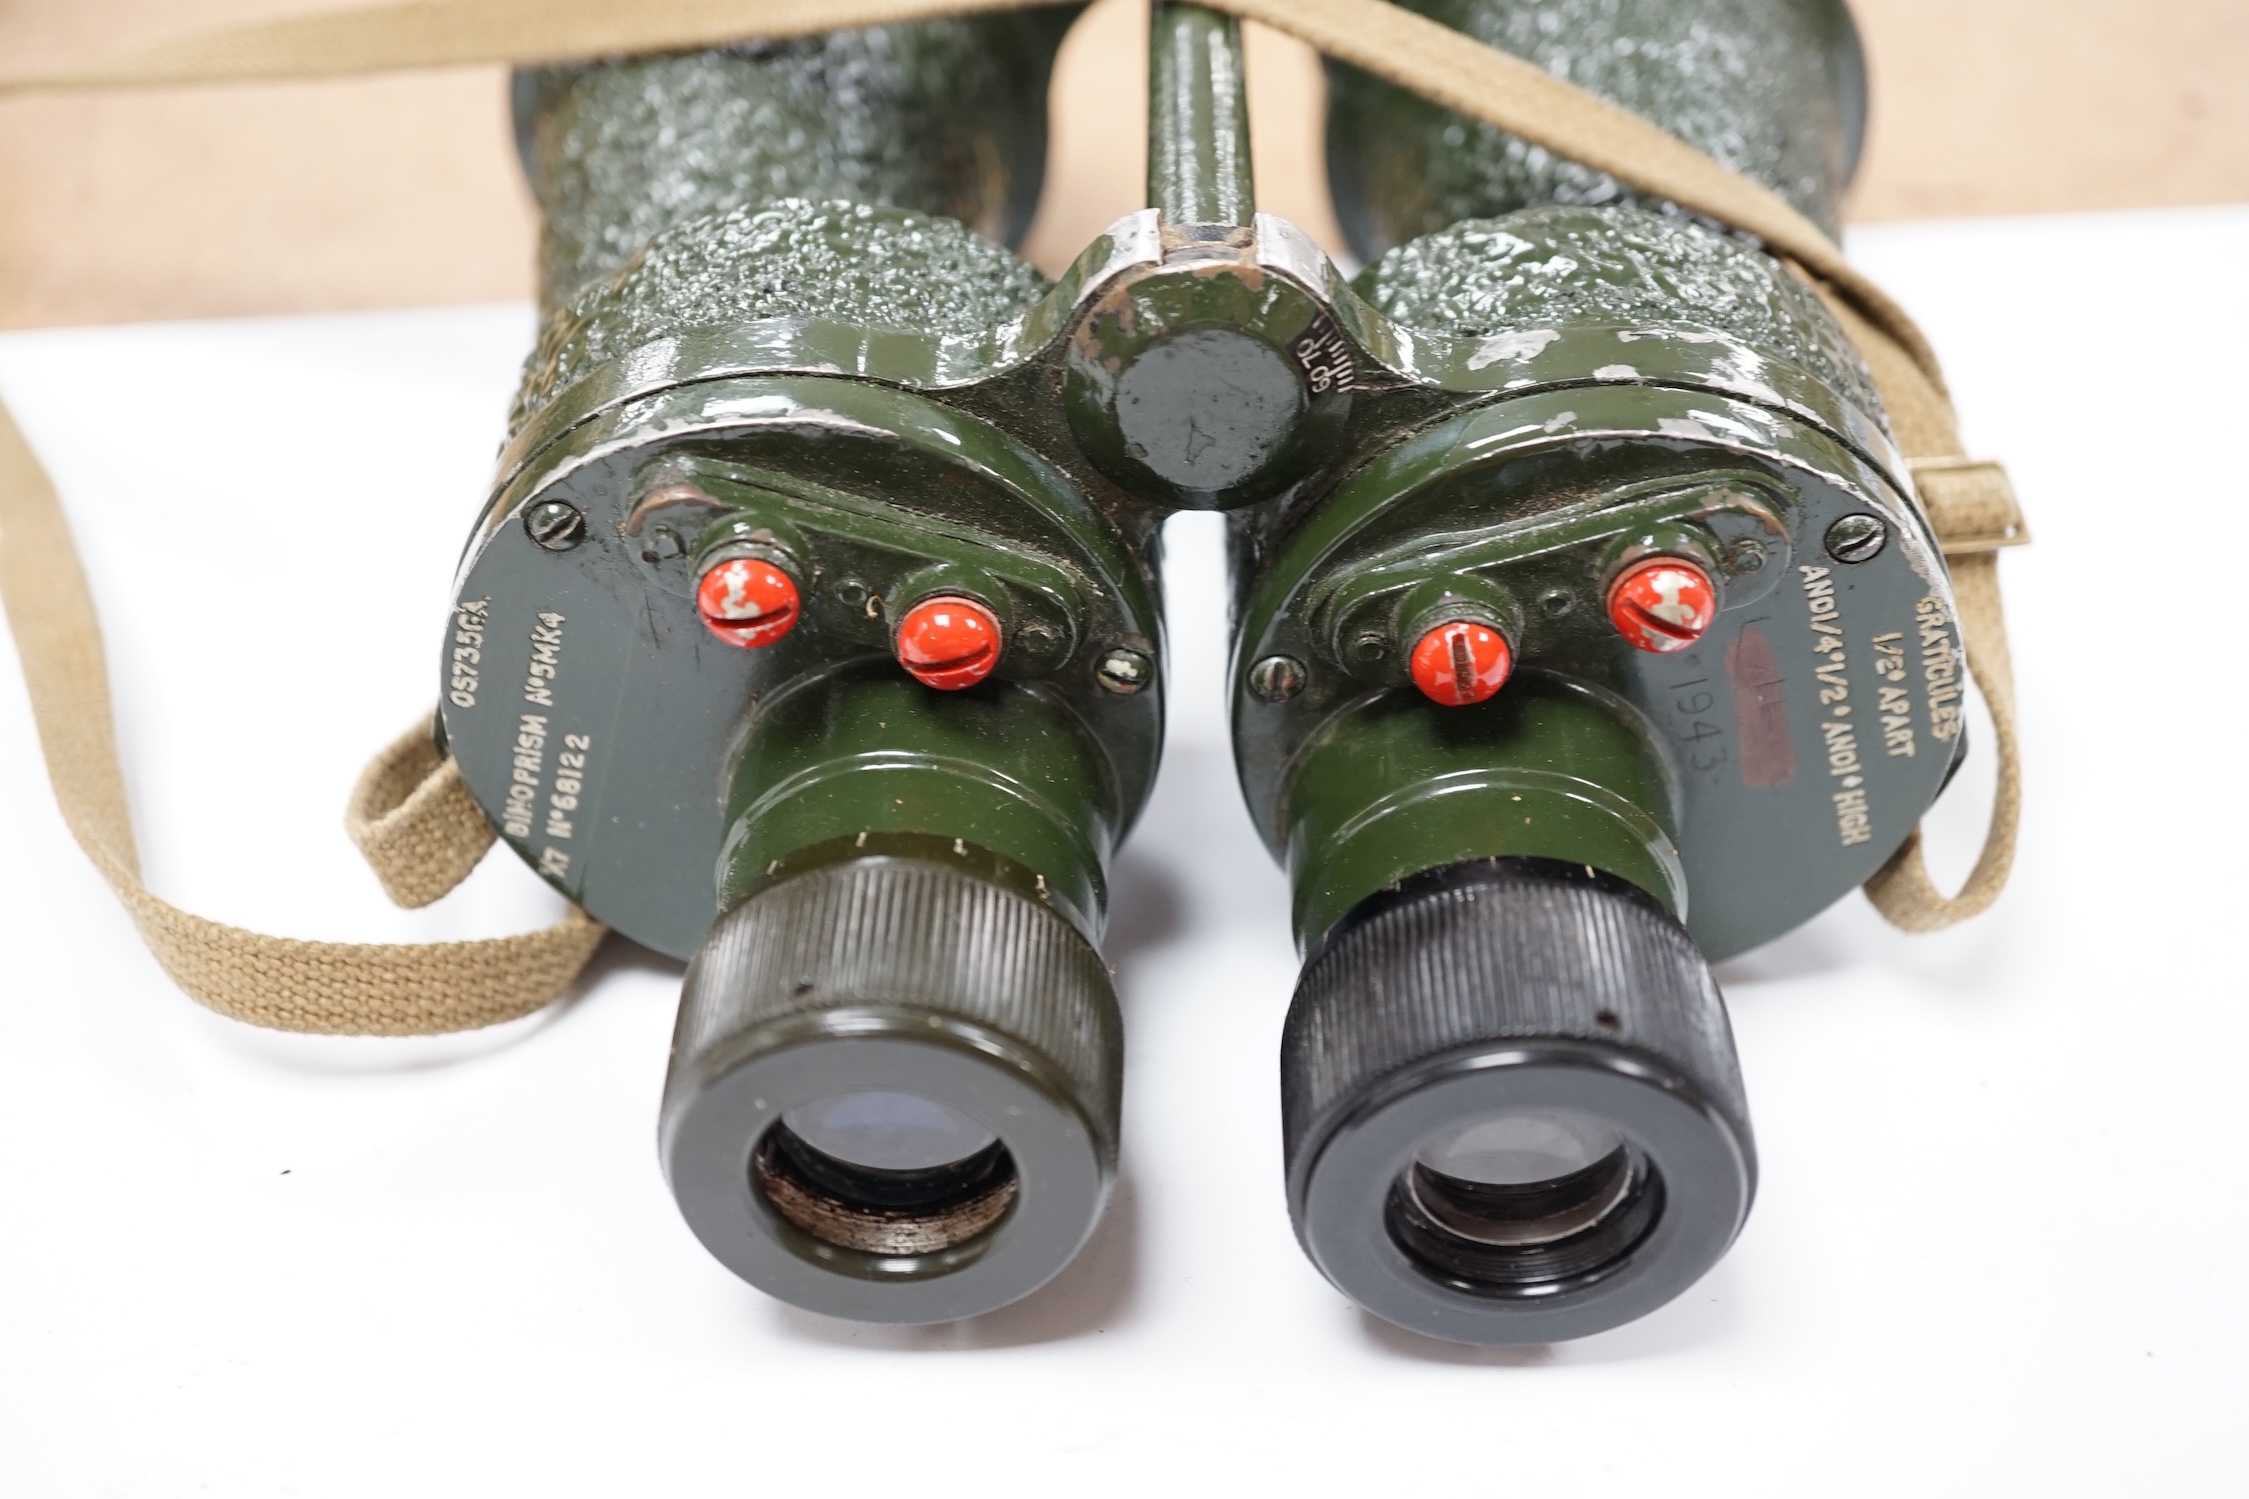 A pair of leather cased, green painted military Binoprism No.5 Mk.4 binoculars, dated 1943, the lid of the leather case impressed with; ‘ 1945 OS/997 Binocular Prismatic No.5 case Mk.1.’ Condition - fair to good, some an